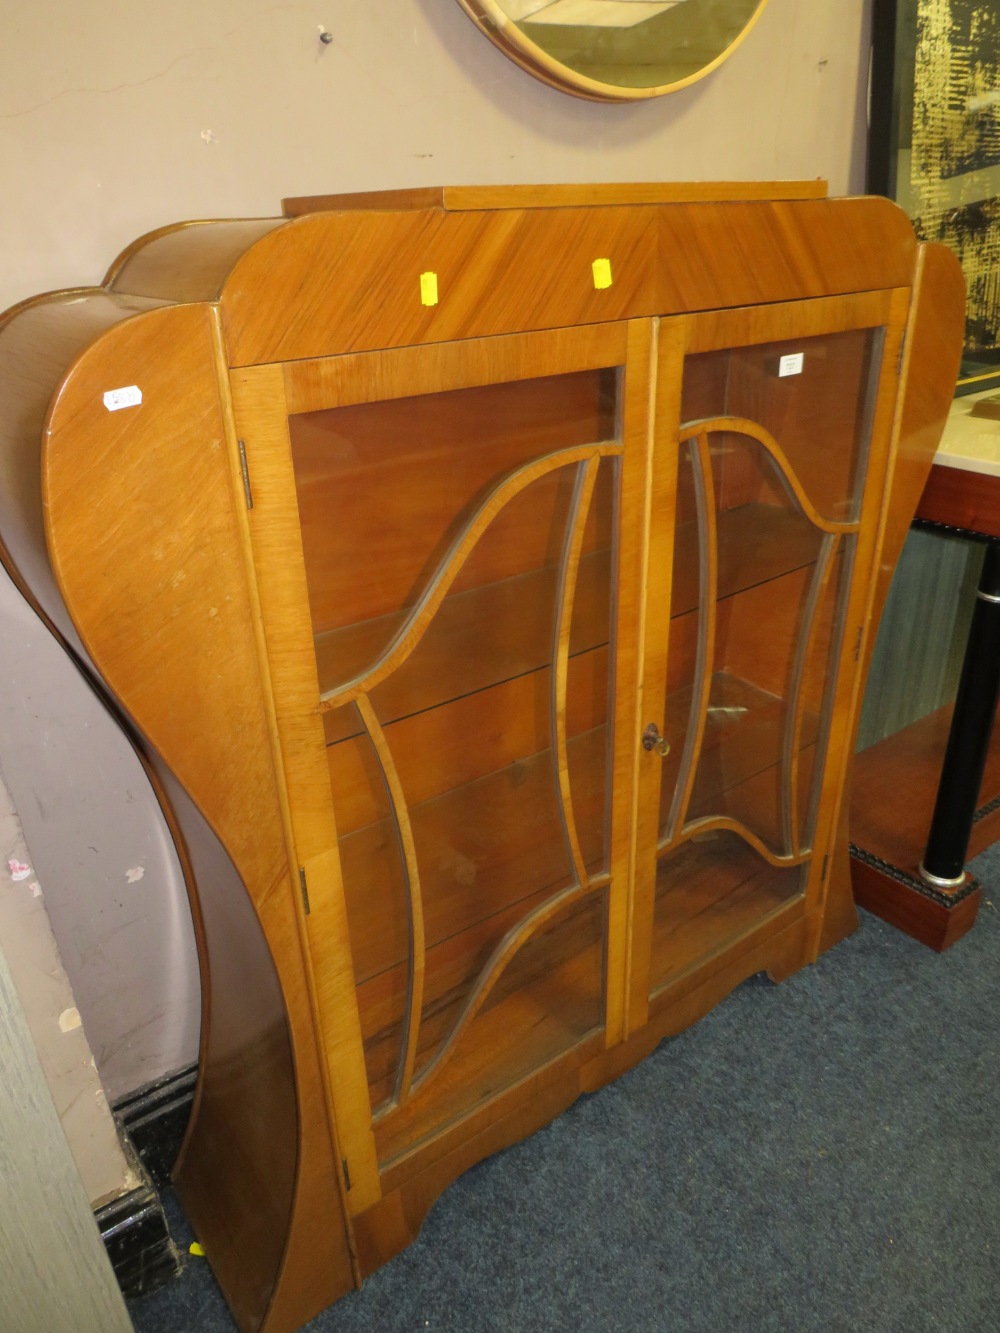 A VINTAGE WALNUT CHINA DISPLAY CABINET - Image 2 of 3